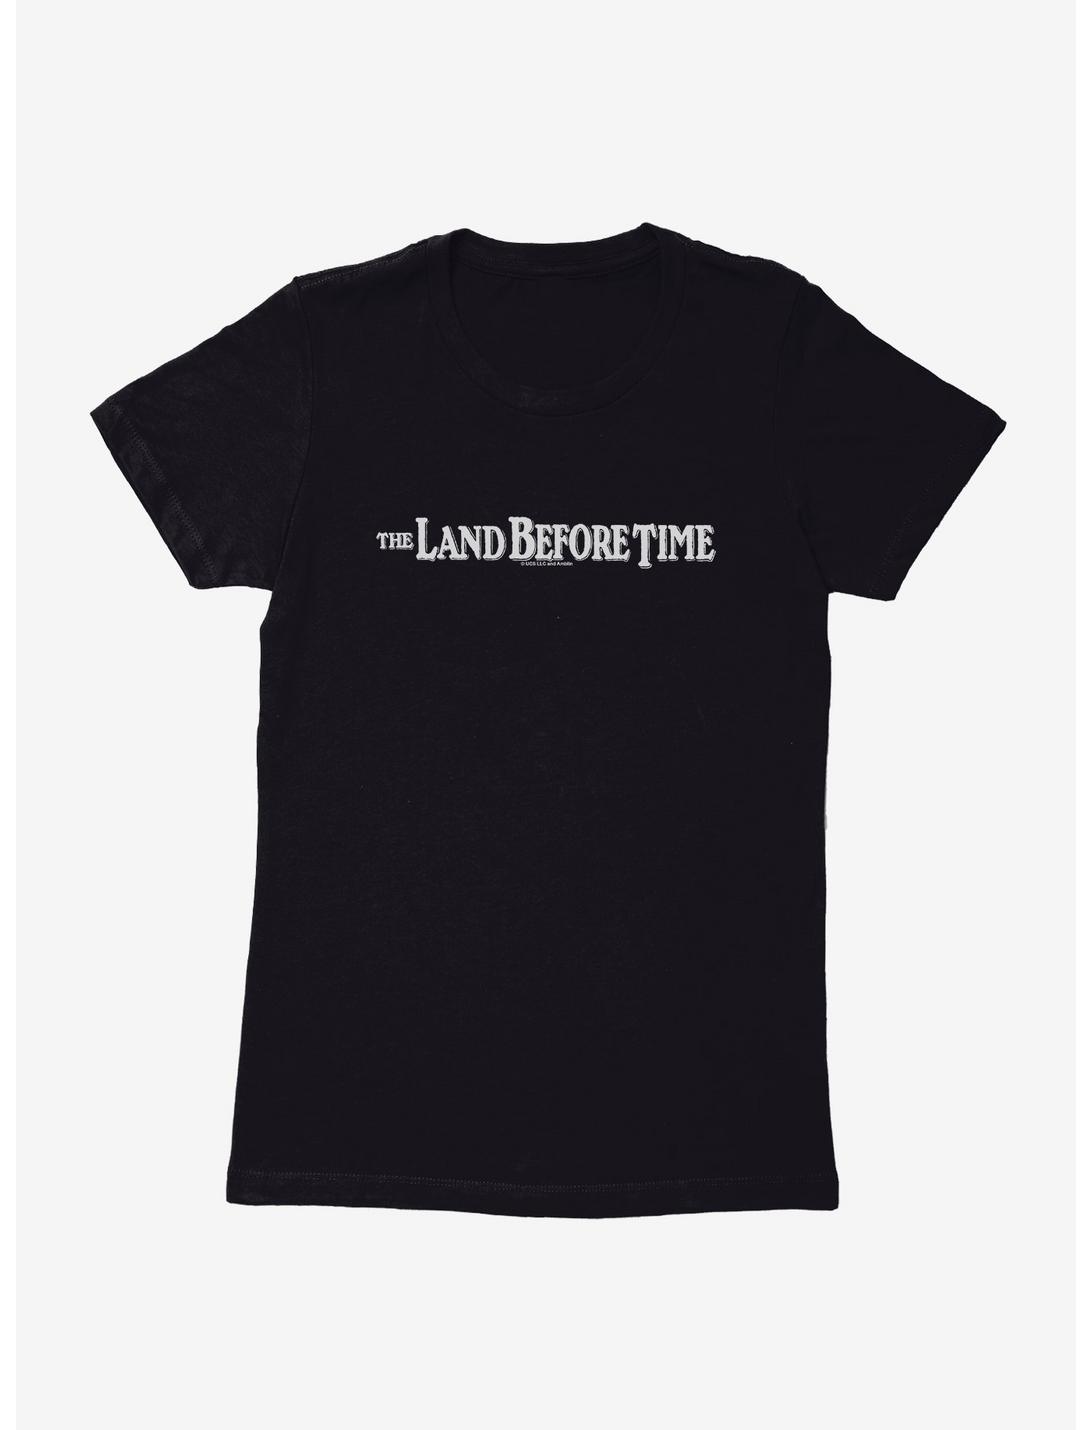 The Land Before Time Title Logo Womens T-Shirt, BLACK, hi-res